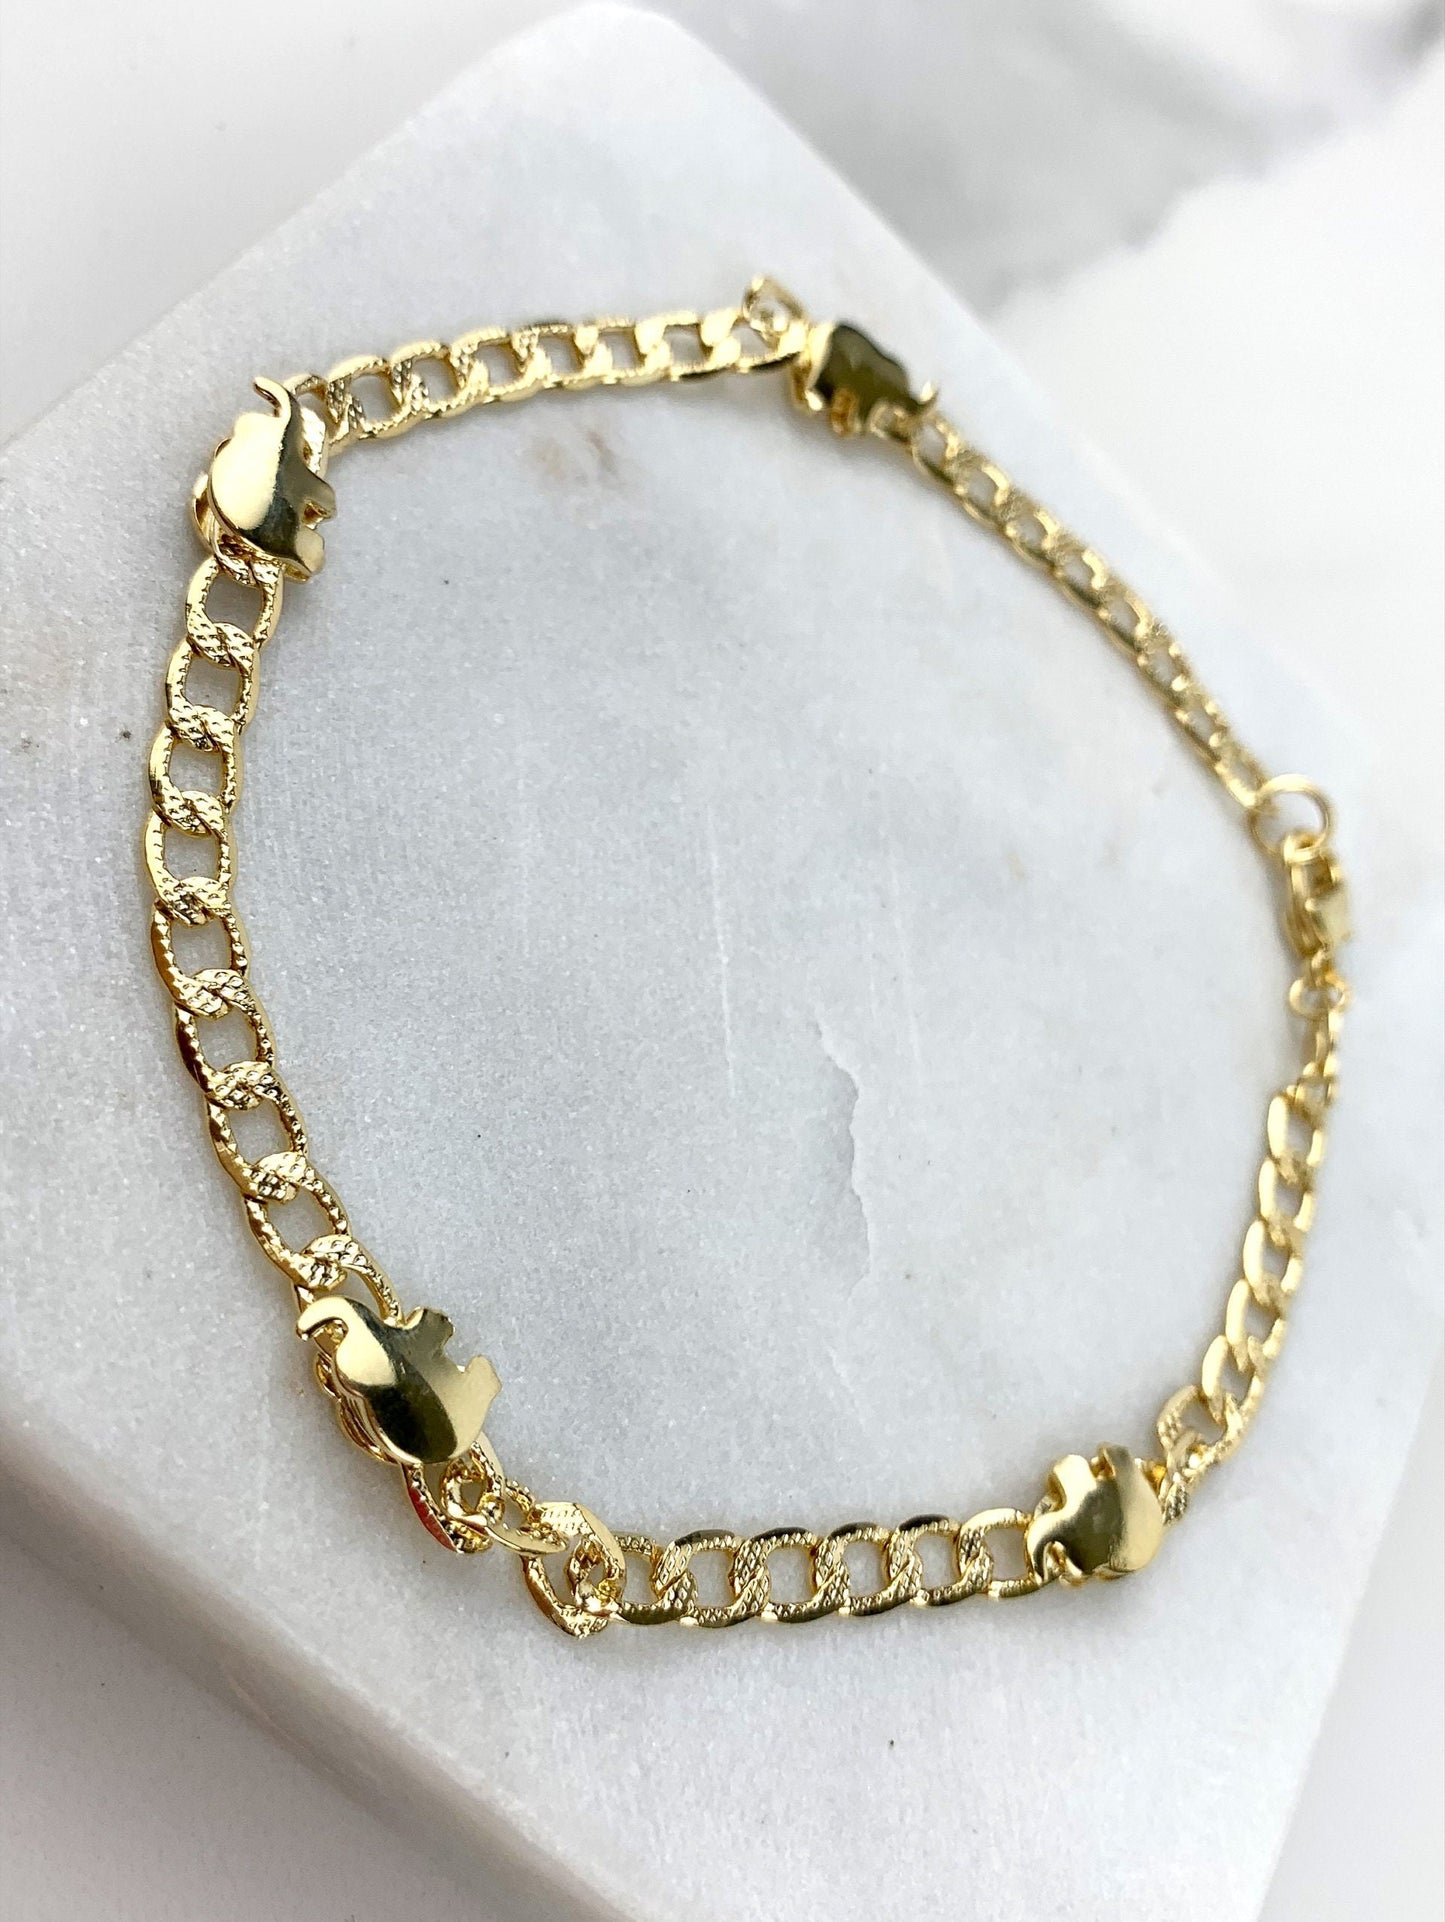 18k Gold Filled 5mm Curb Link Chain with Linked Elephants Anklet, Protection & Lucky, Wholesale Jewelry Making Supplies